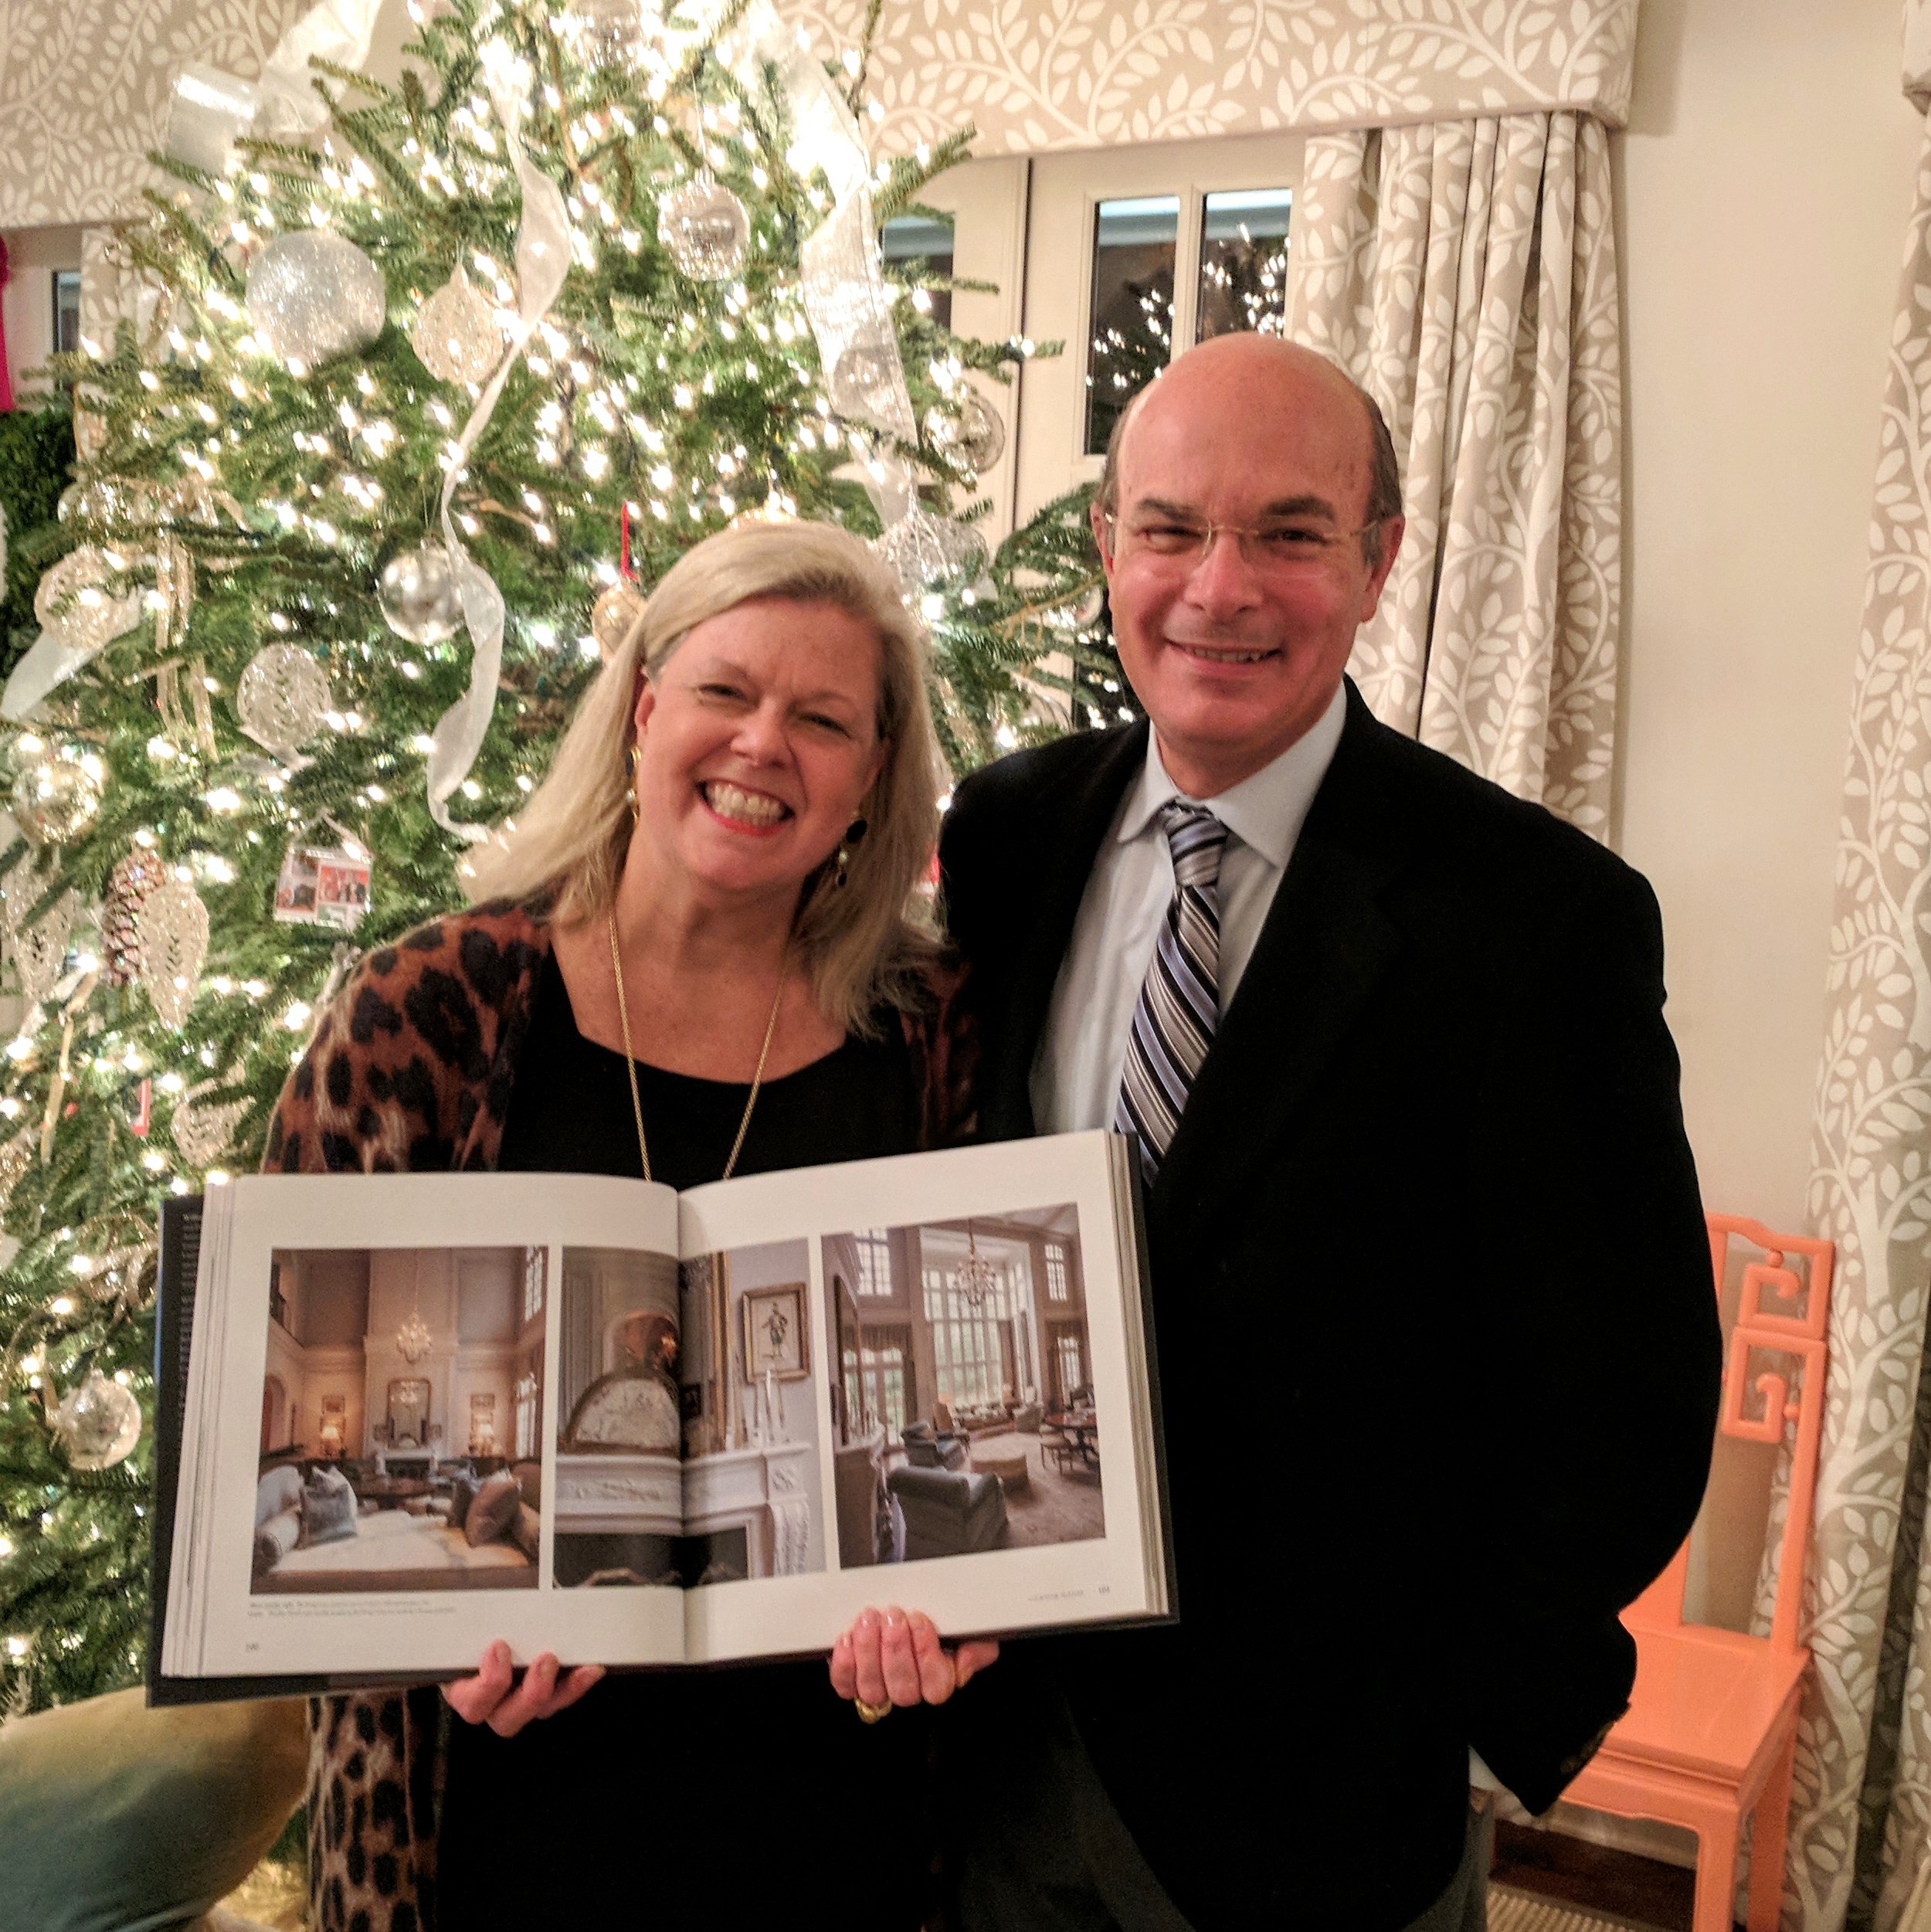 Patricia McLean of McLean Interiors with William T. Baker